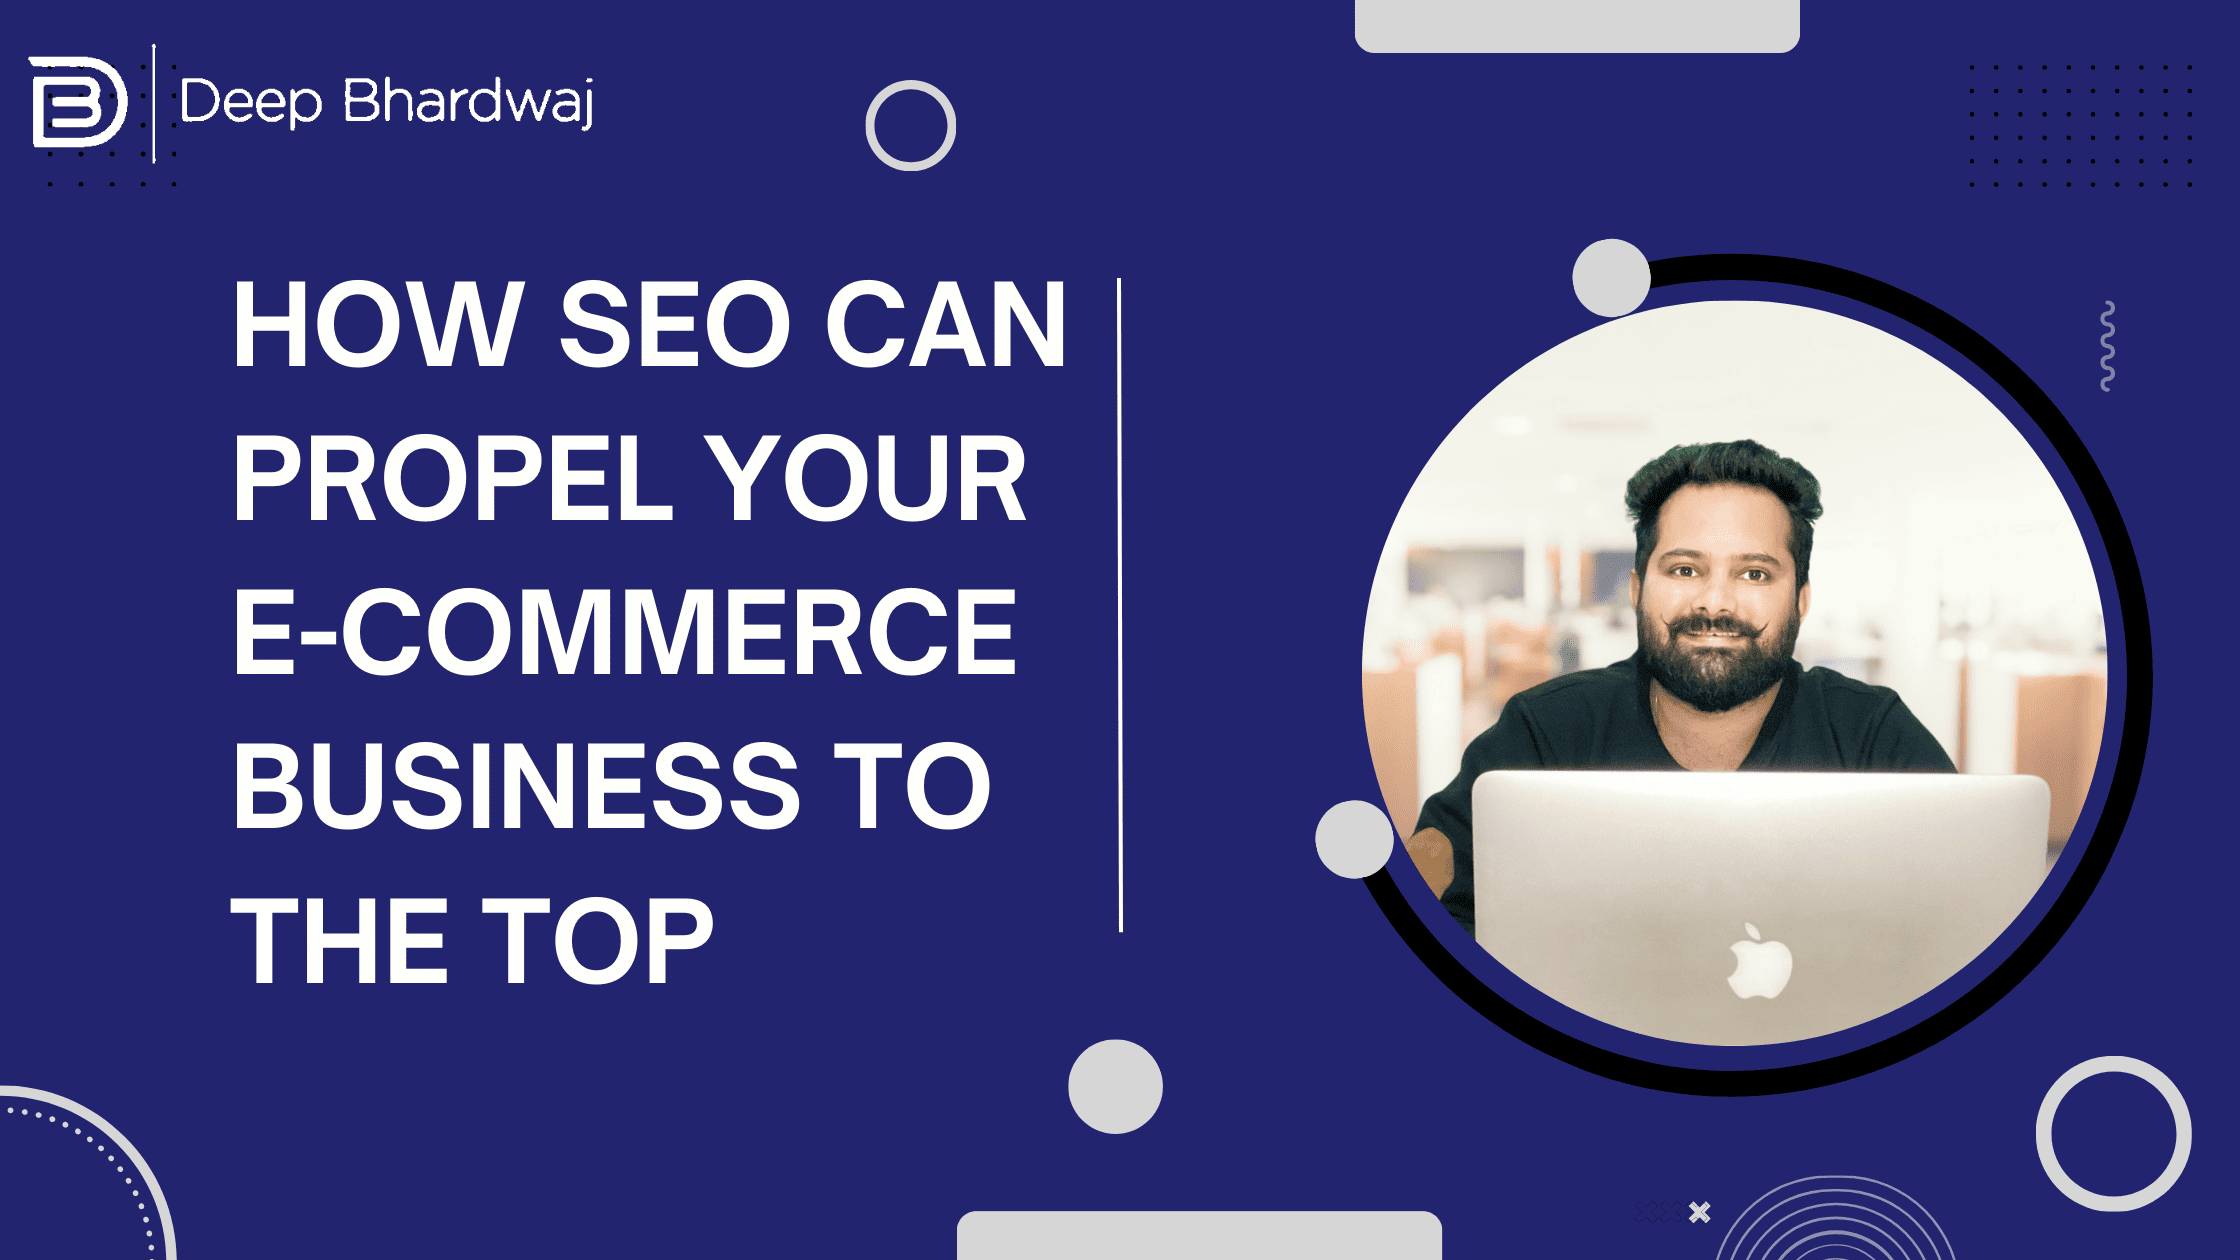 How SEO Can Propel Your E-commerce Business to the Top